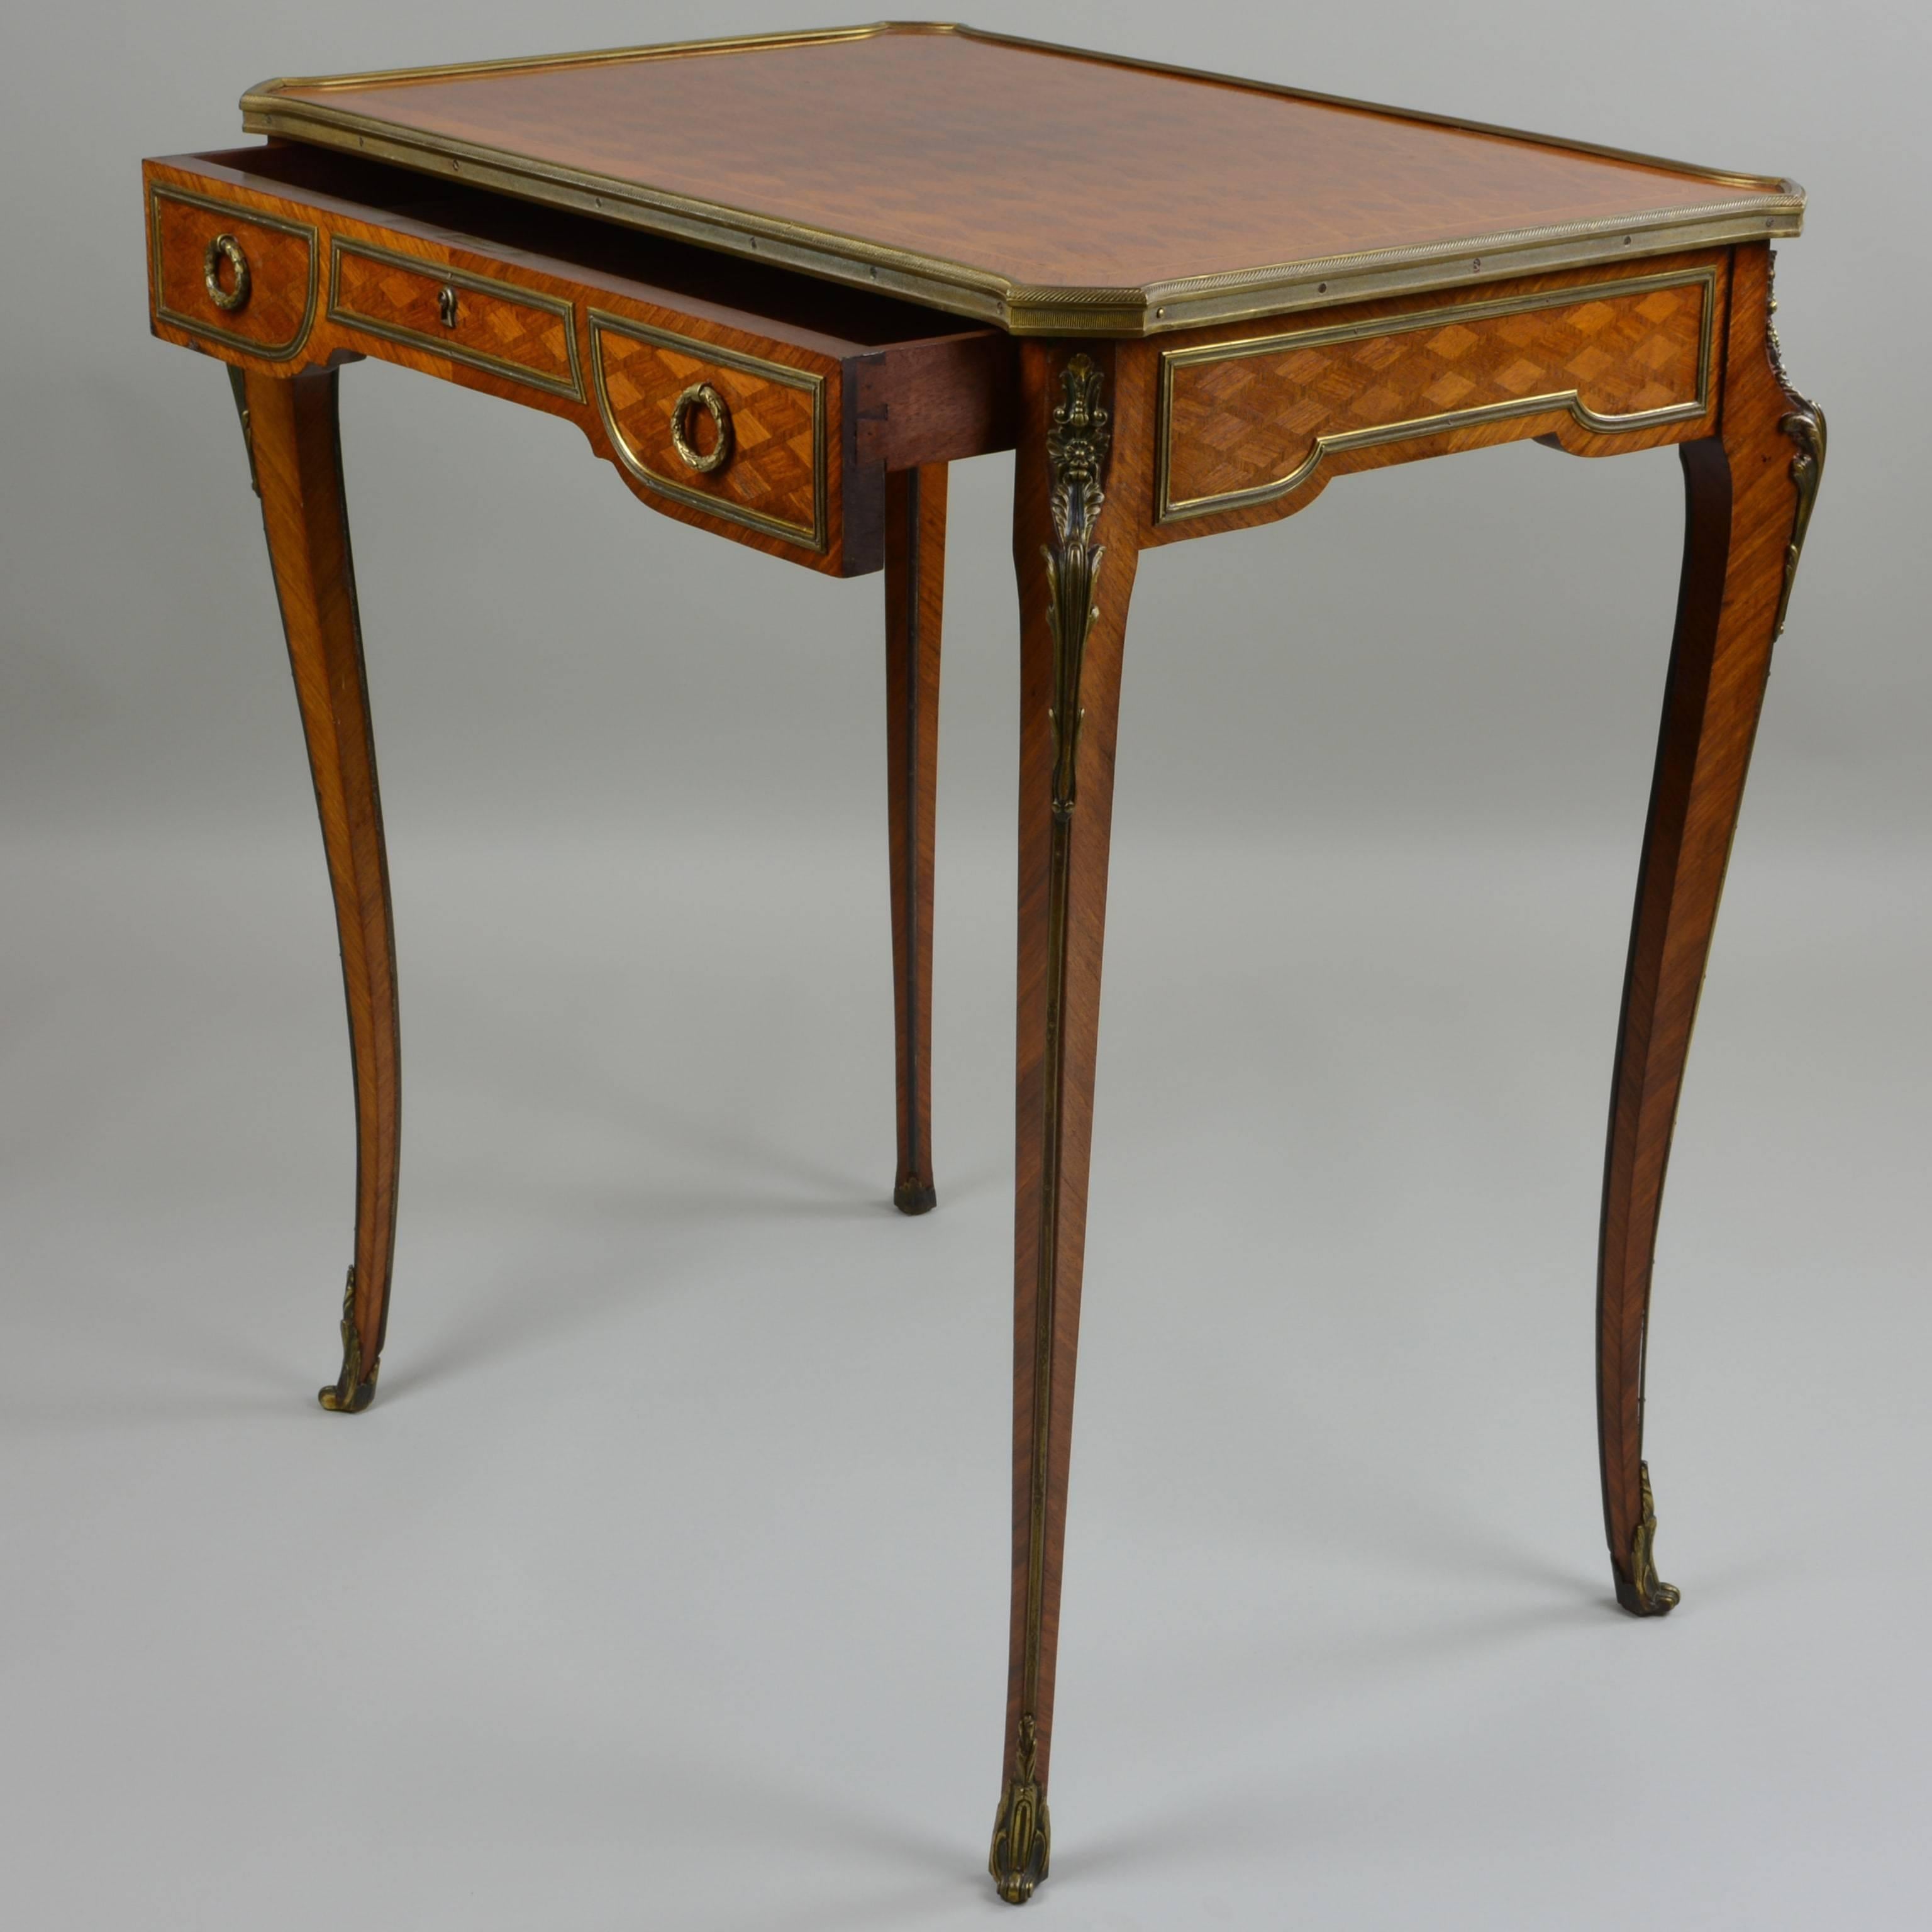 Parquetry 19th Century Gilt Bronze-Mounted Kingwood Tulipwood Inlaid Occasional Table For Sale